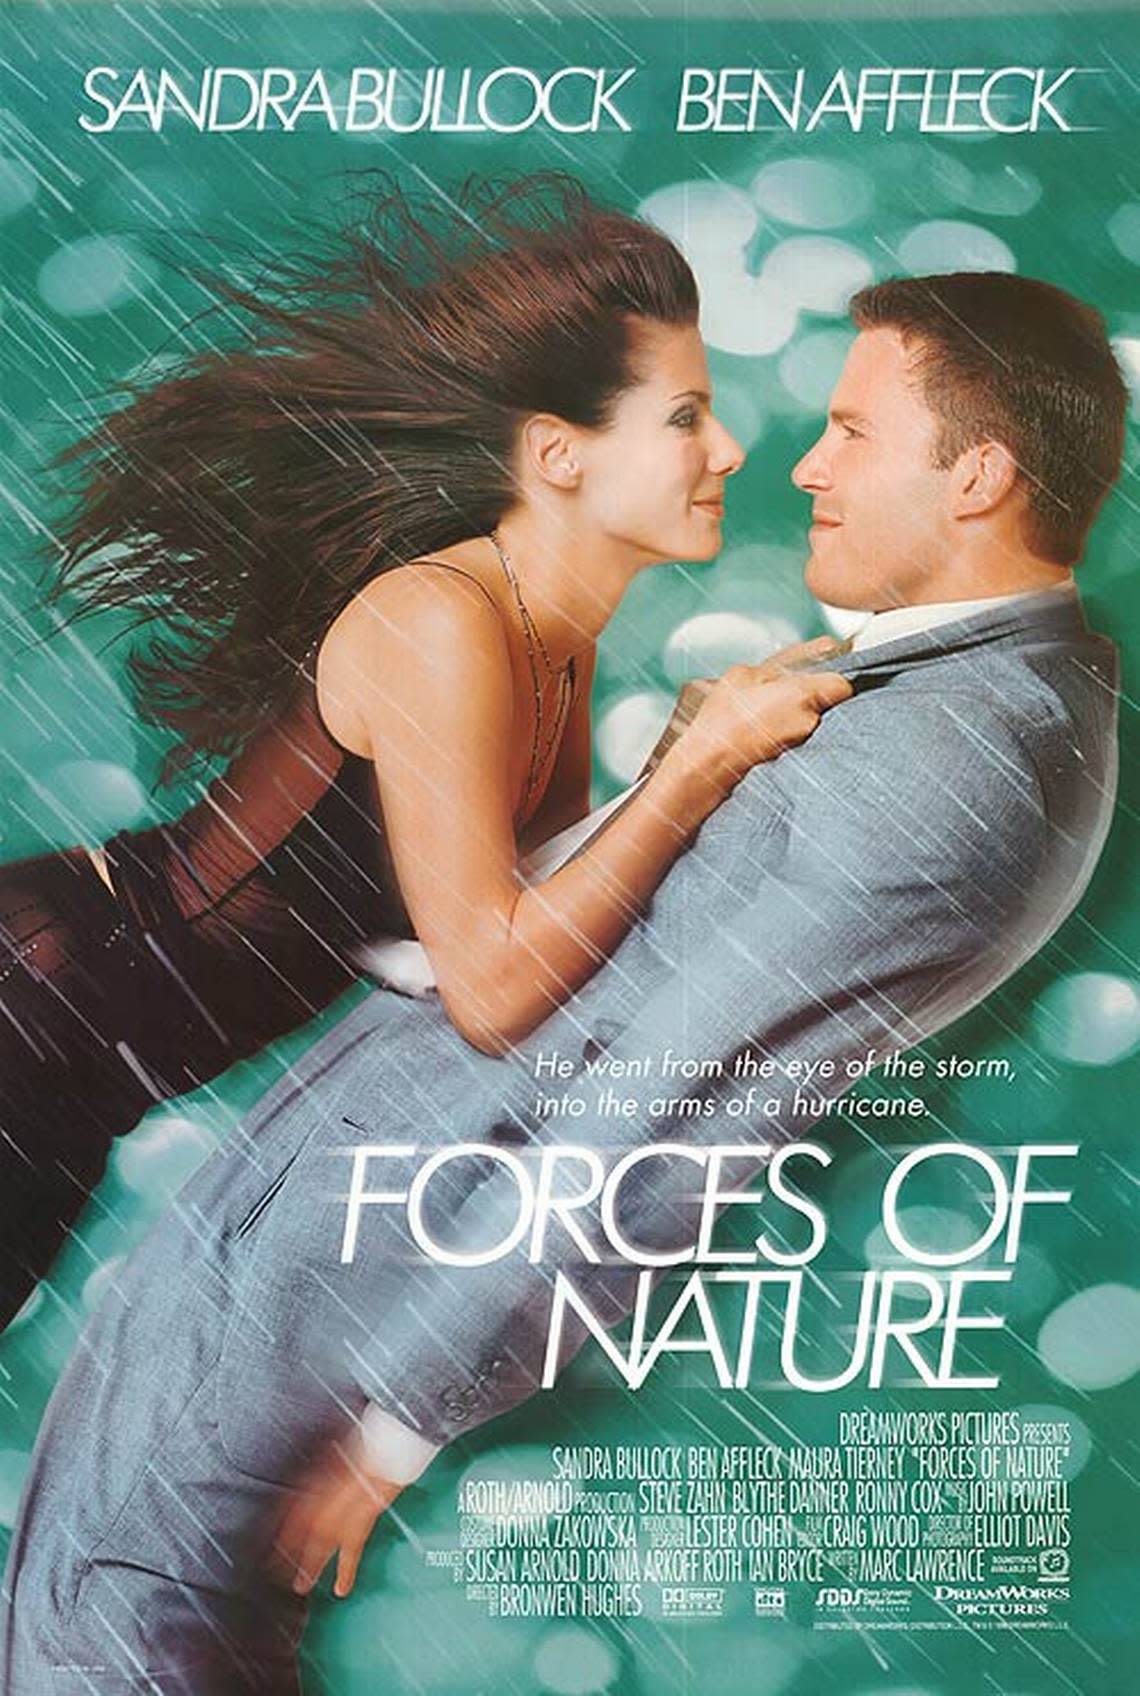 “Forces of Nature” stars Sandra Bullock and had scenes filmed in Beaufort County. IMDb